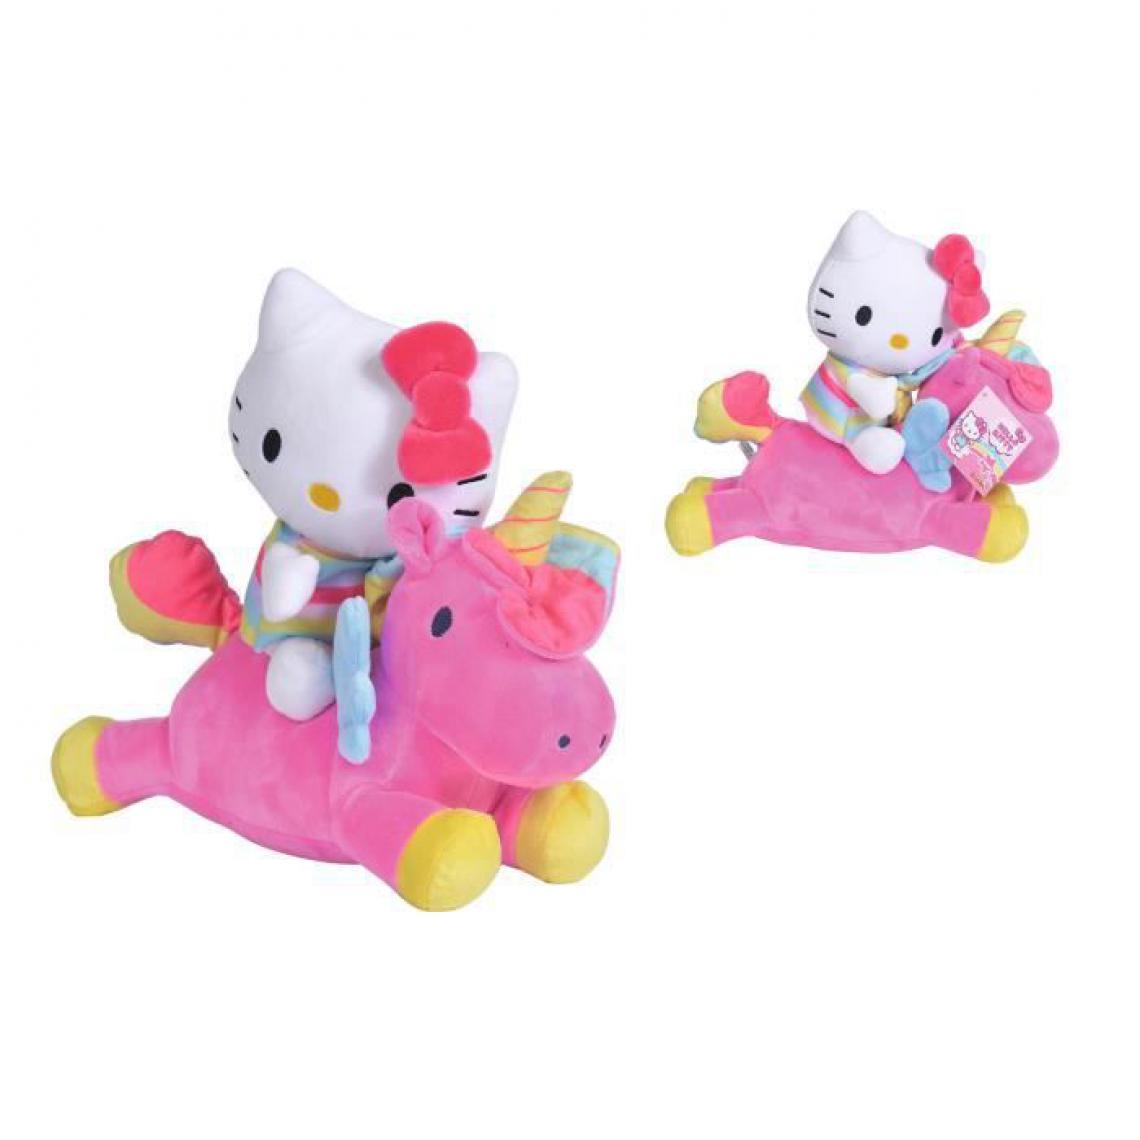 Simba Dickie Group - Peluche Licorne HELLO KITTY - SIMBA - Héros et personnages